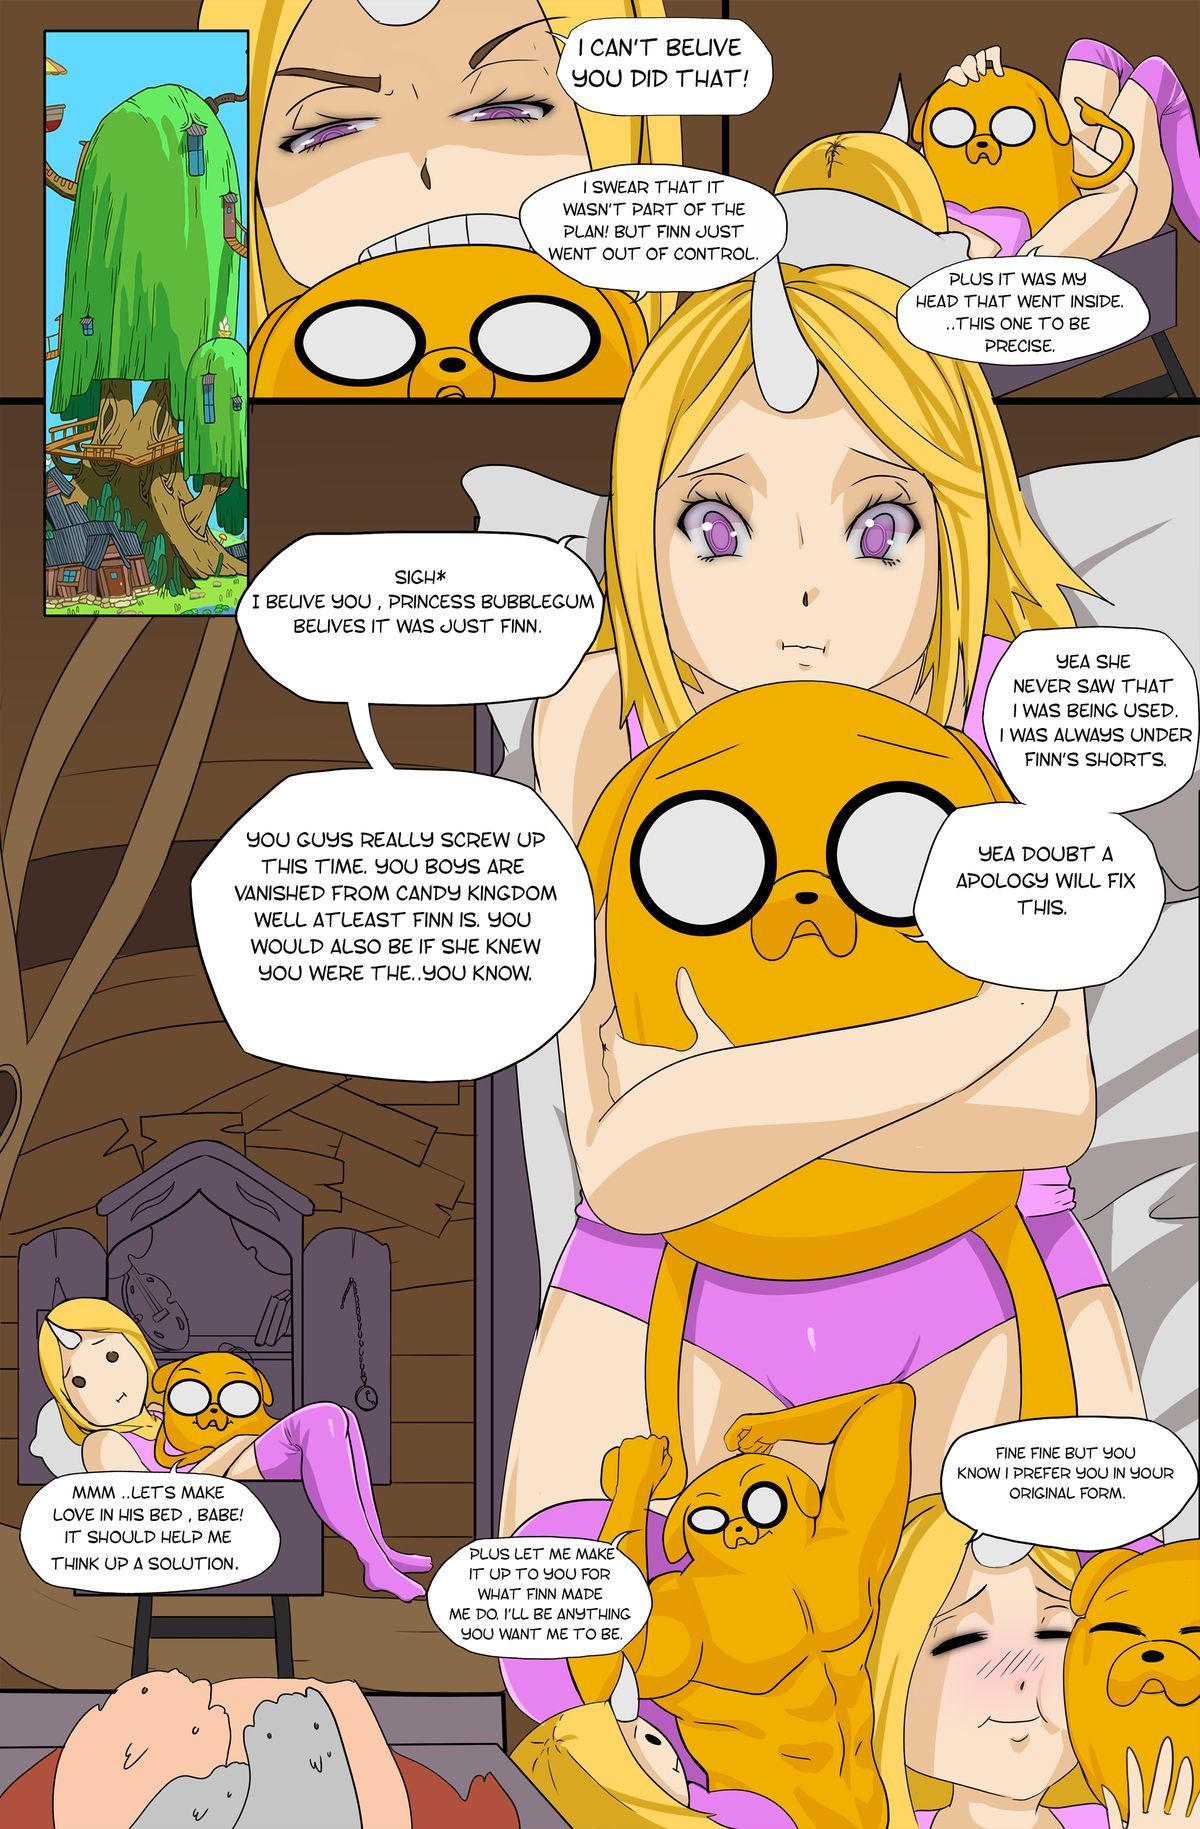 [Dipdoodle]_Adventure_Time_-_Desire_For_the_Color_Lust comix_59883.jpg